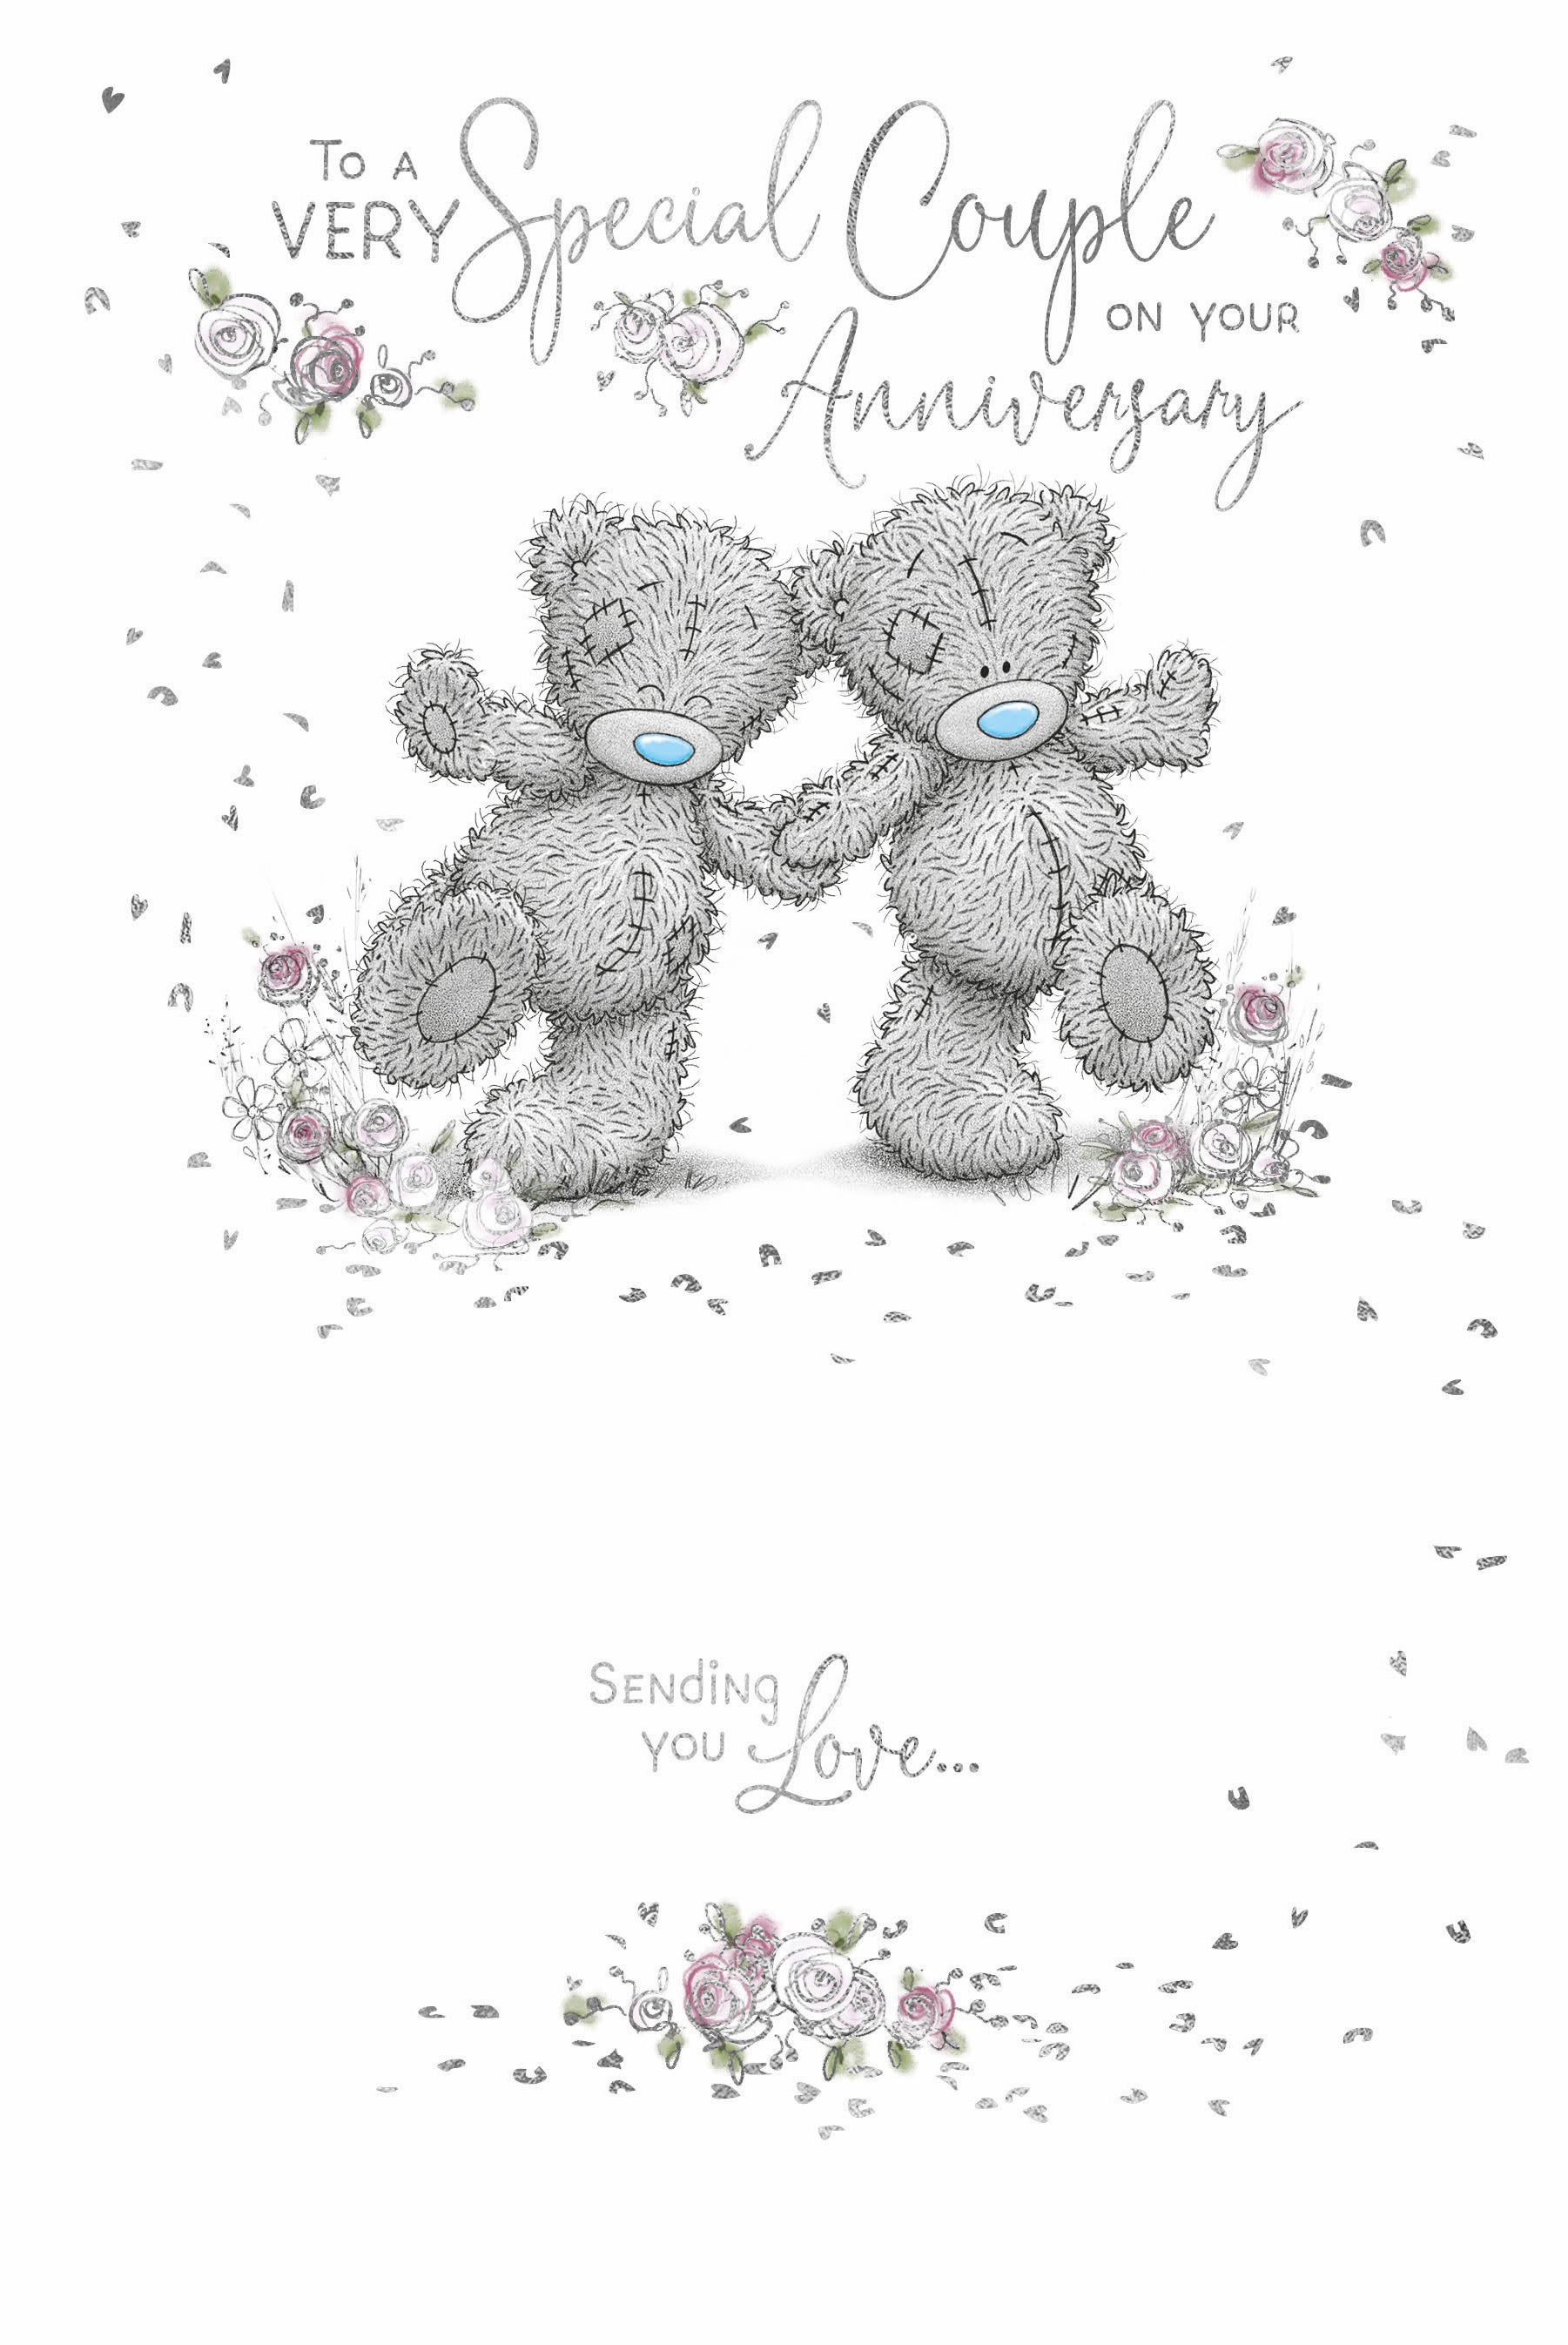 Anniversary Special Couple Card - Bears Holding Hands